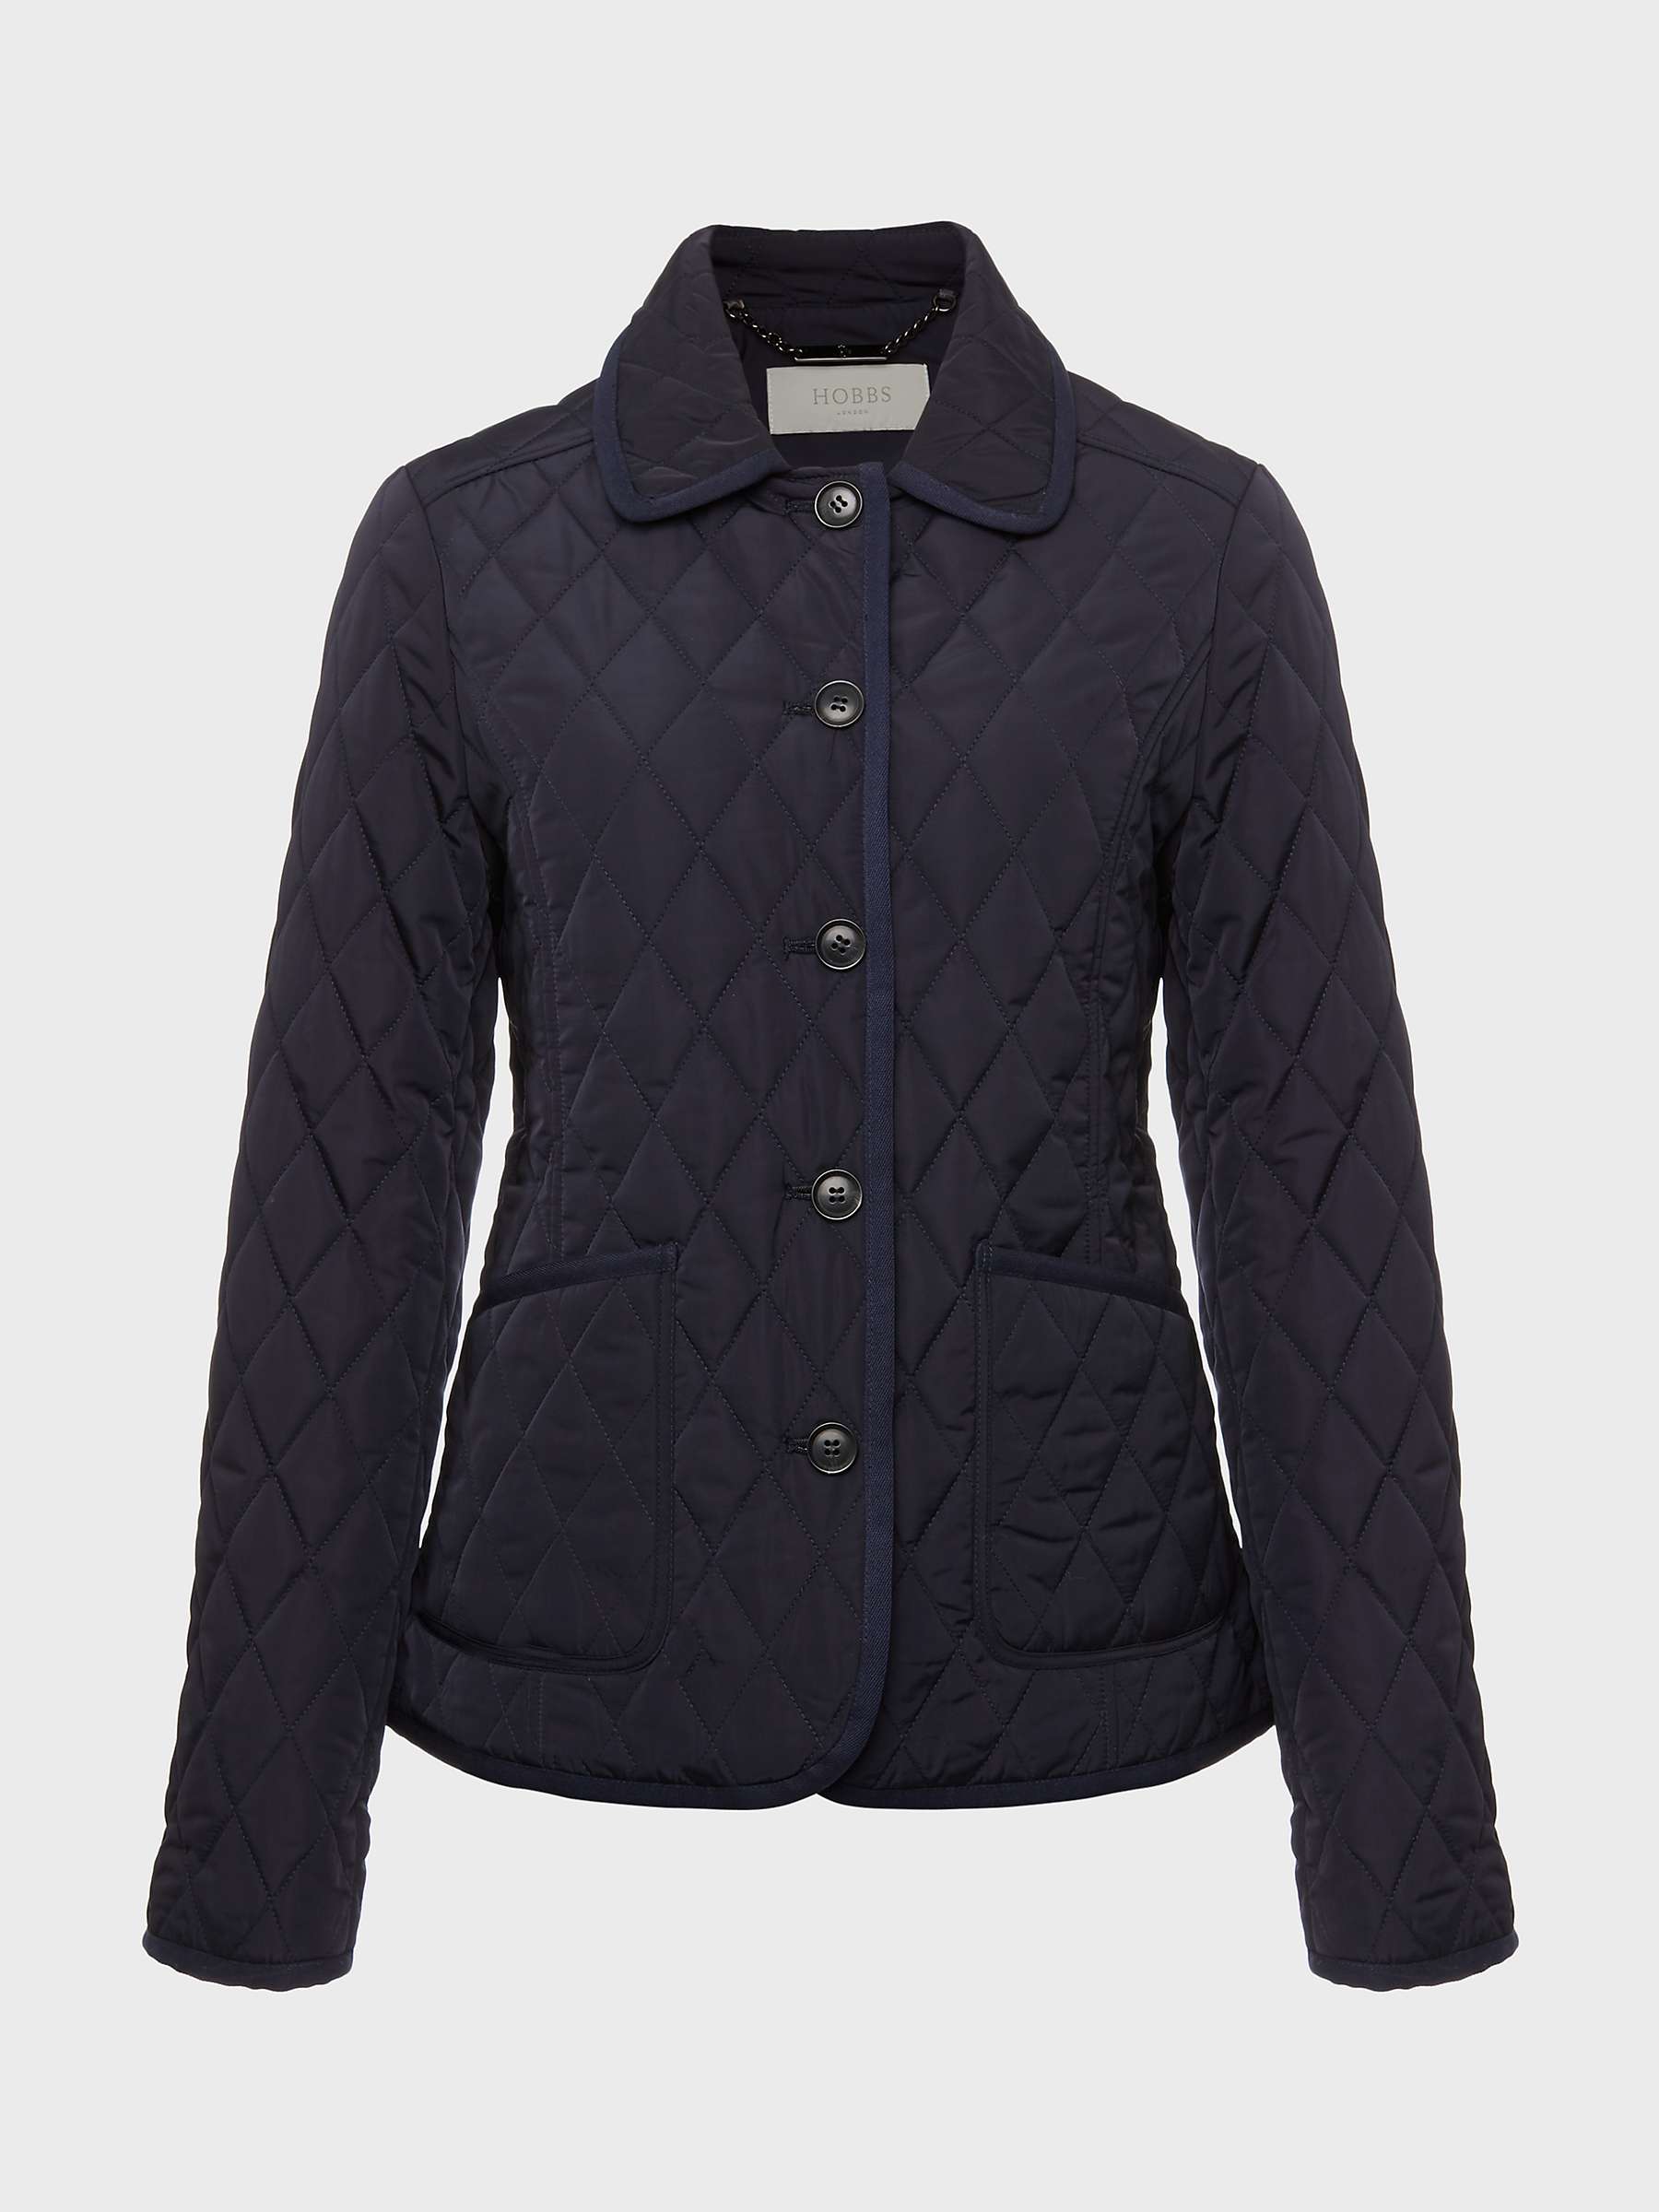 Hobbs Josephine Quilted Jacket, Midnight Navy at John Lewis & Partners